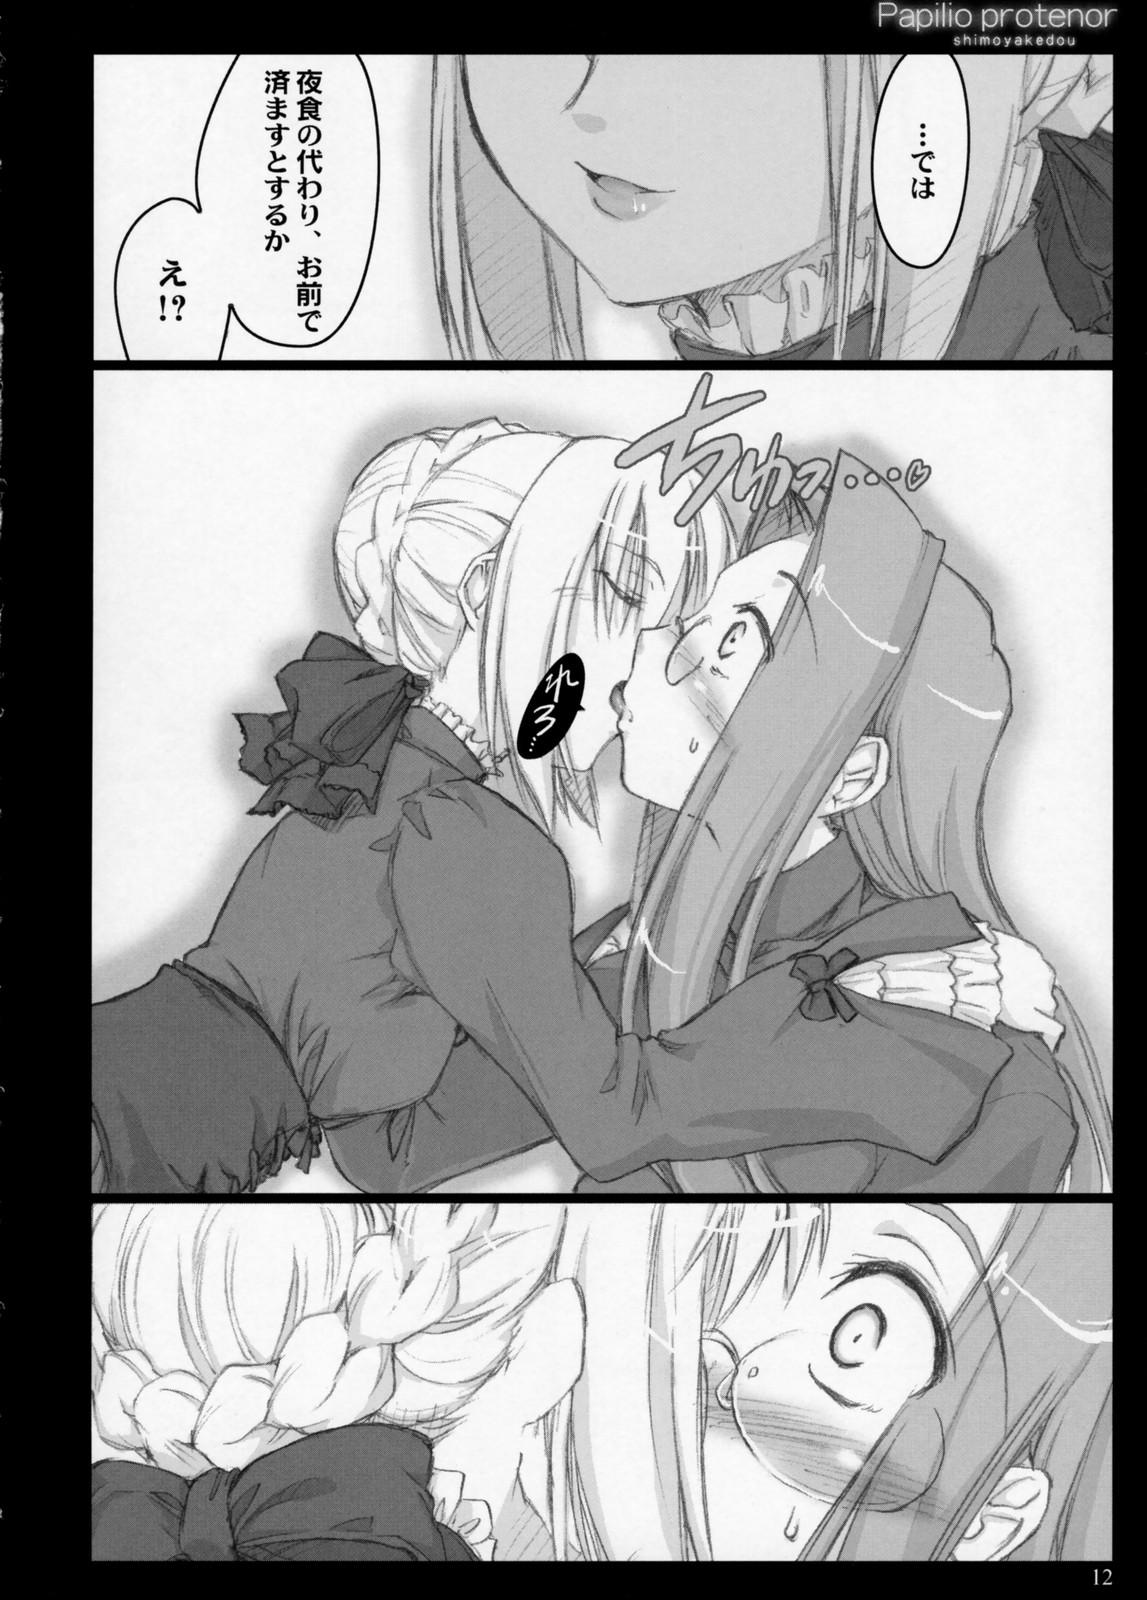 Thailand Papilio Protenor - Fate stay night Kiss - Page 11